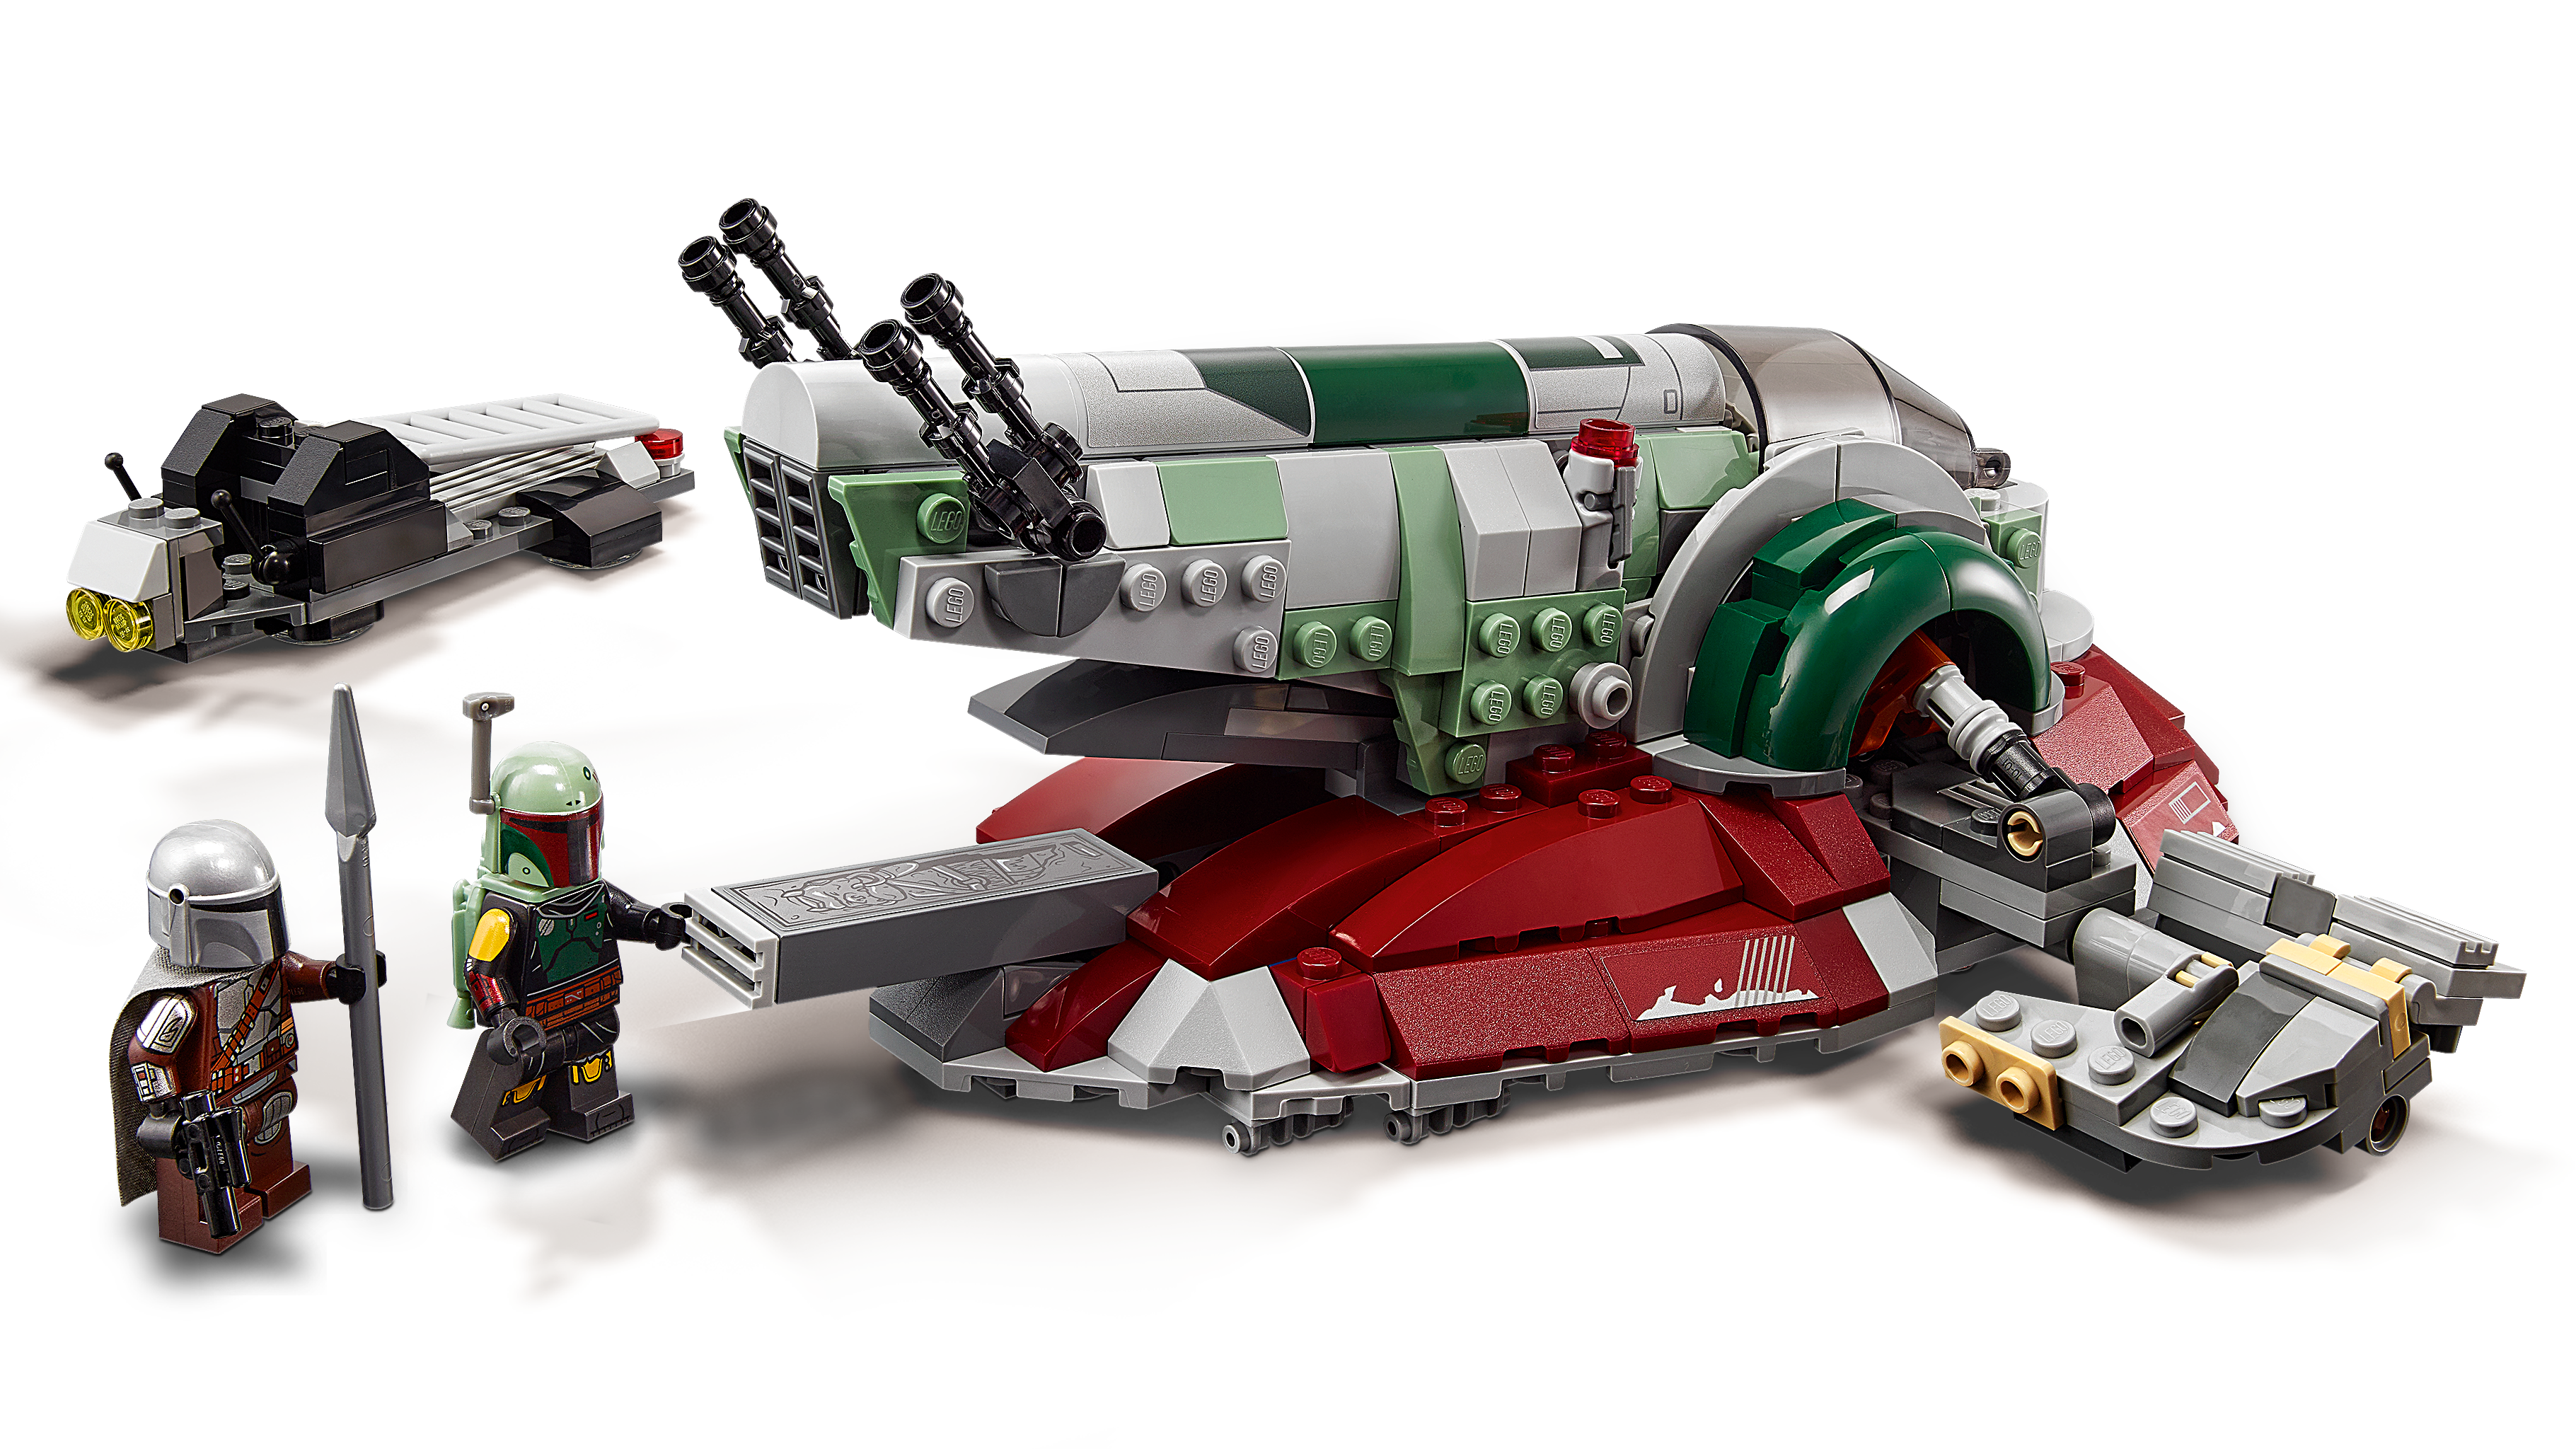 593 Pieces LEGO Star Wars Boba Fett’s Starship 75312 Fun Toy Building Kit; Awesome Gift Idea for Kids; New 2021 